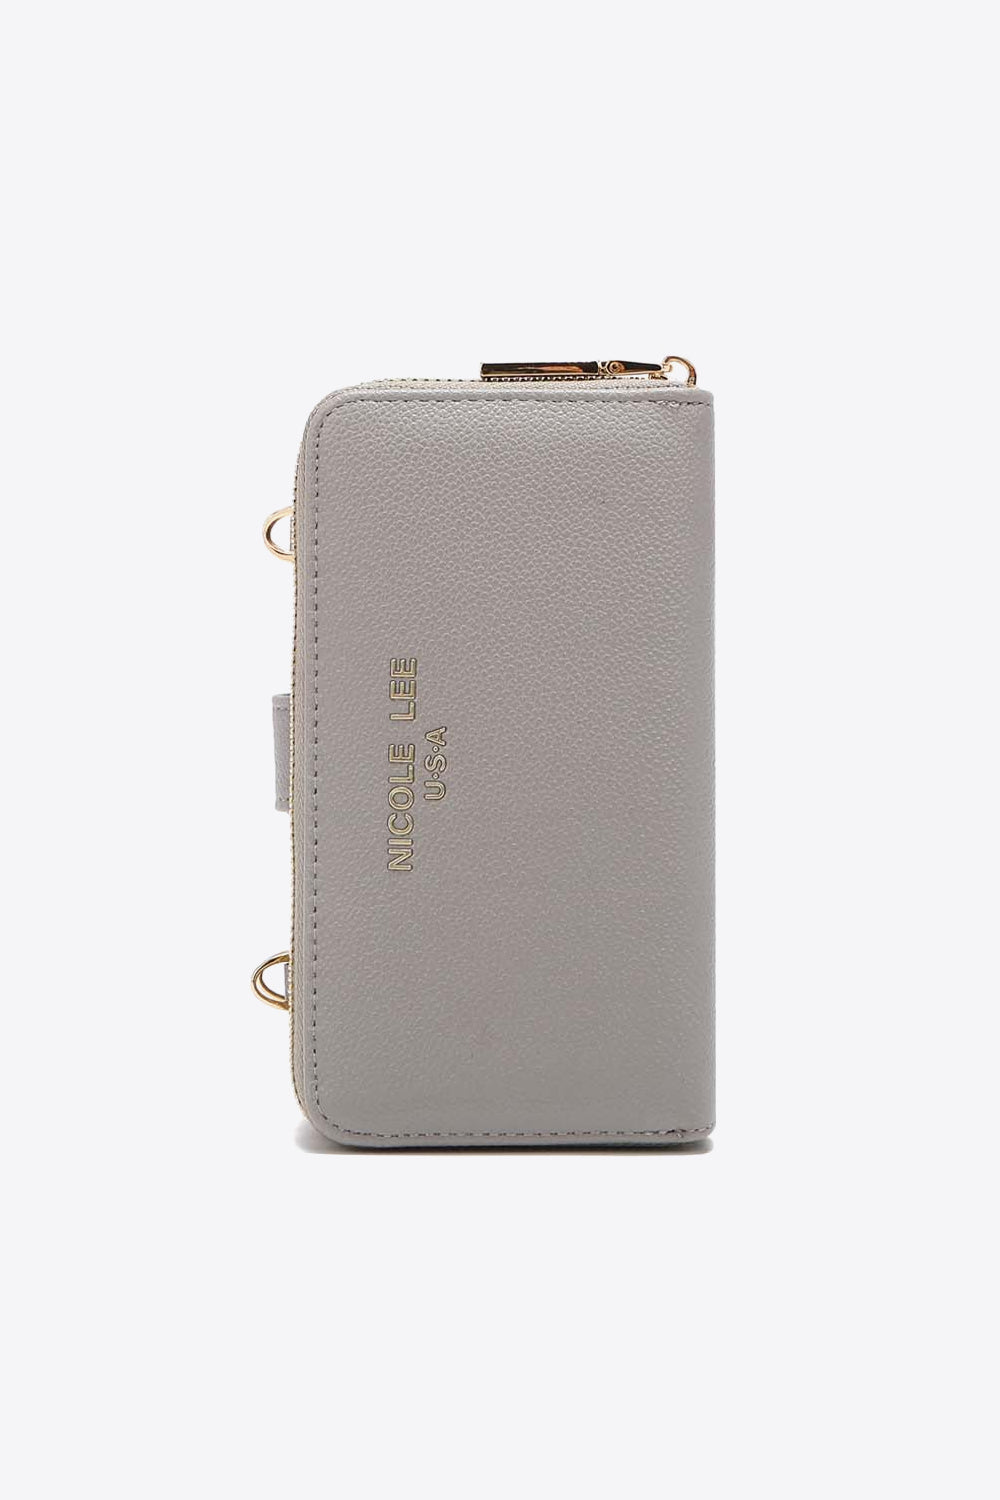 Nicole Lee - Shipped from USA - Two-Piece Crossbody Phone Case Wallet - Premium  from Trendsi - Just $28.90! Shop now at Concordia Style Boutique